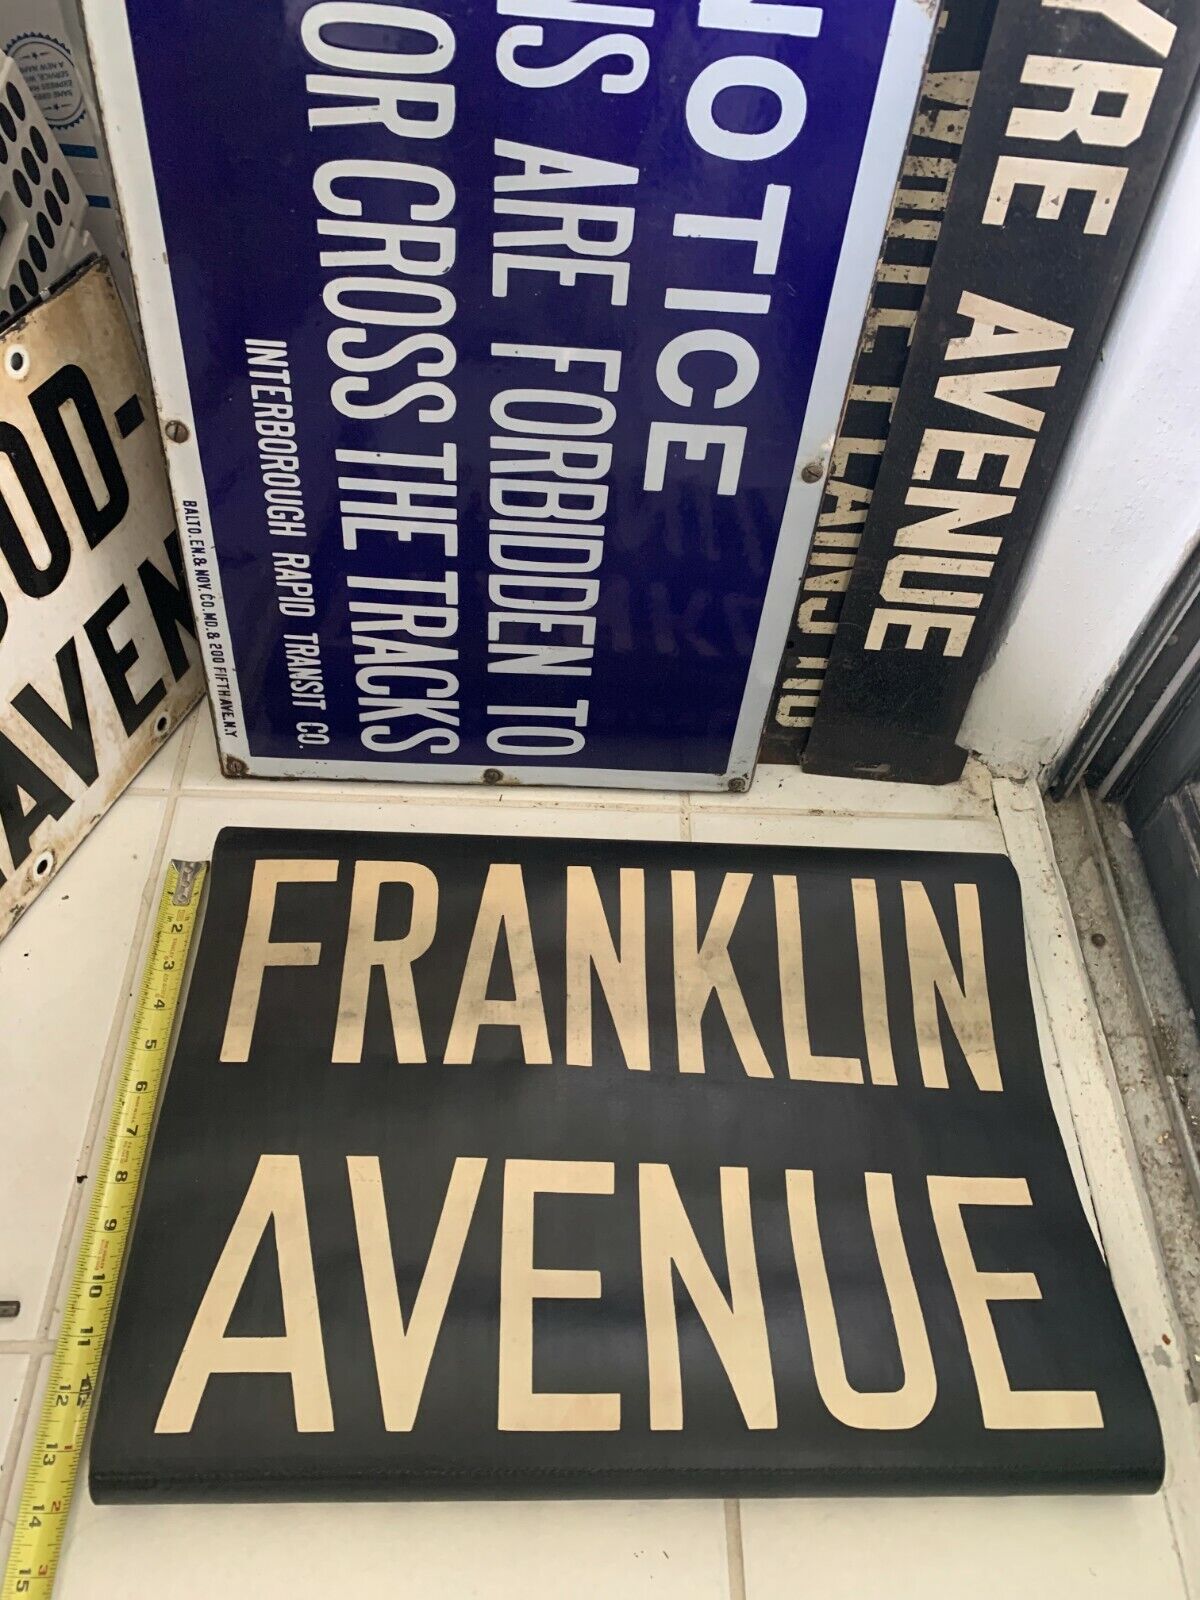 1948 NY NYC SUBWAY ROLL SIGN BROOKLYN FRANKLIN AVENUE CROWN HEIGHTS VINTAGE BMT